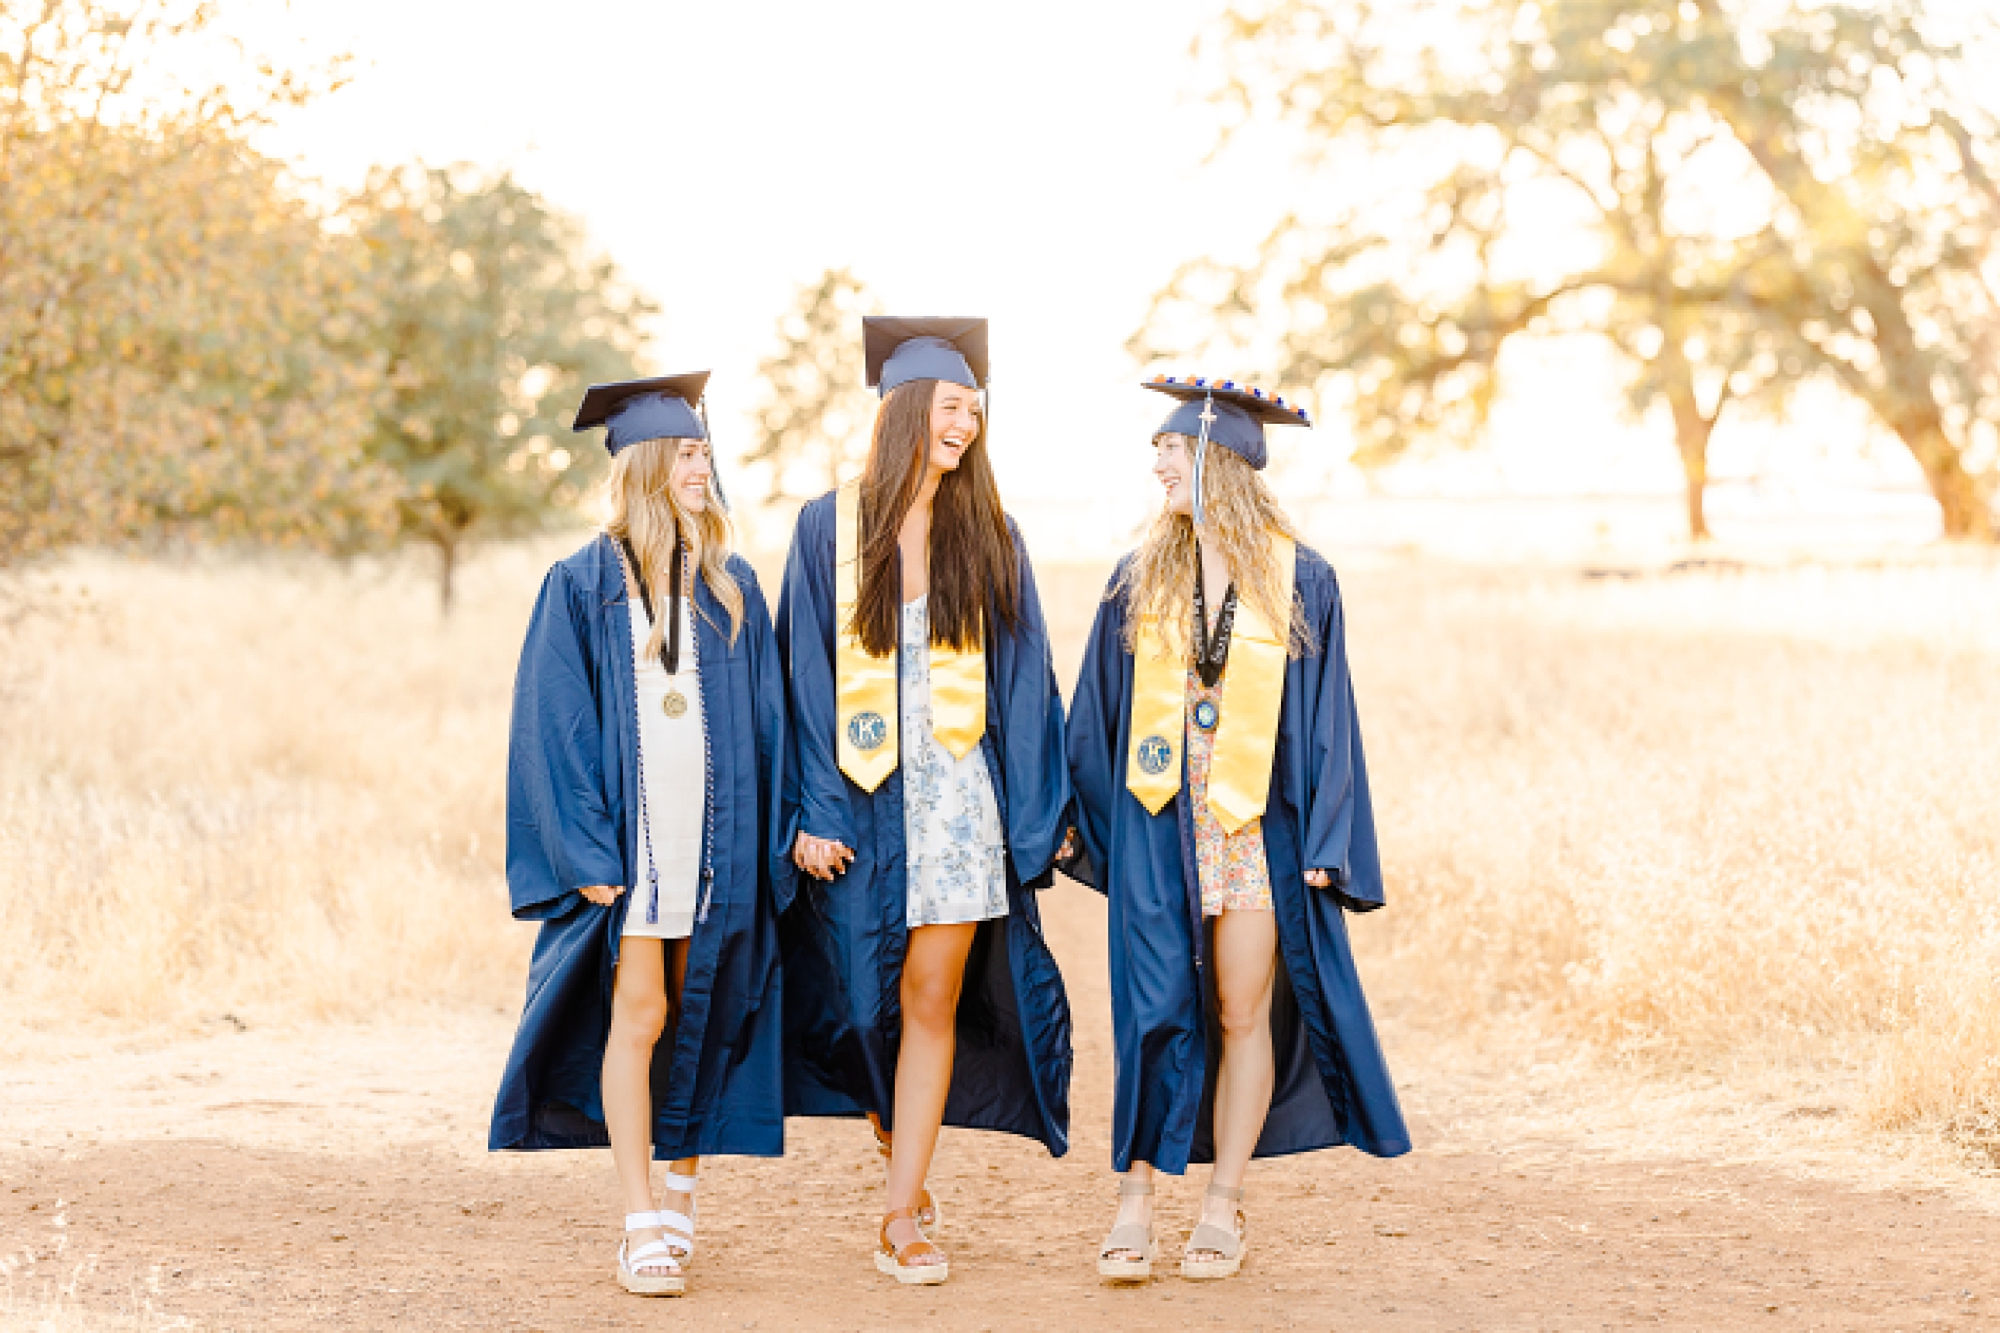 cap and gown senior rep session